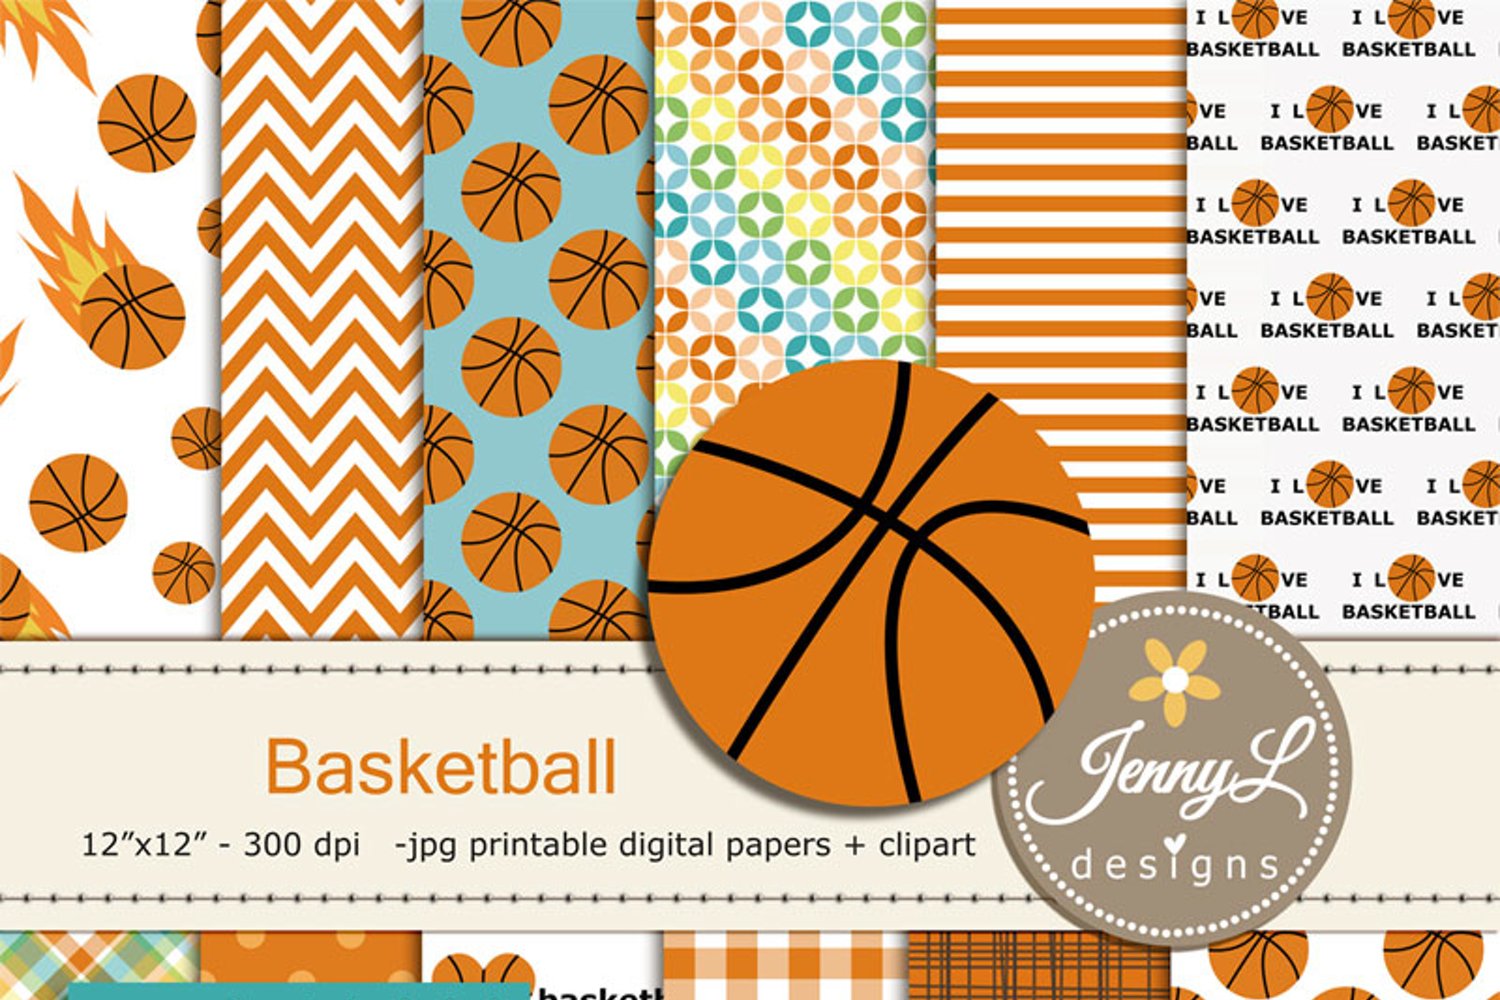 Cover image of Basketball Digital Papers and Clipart.